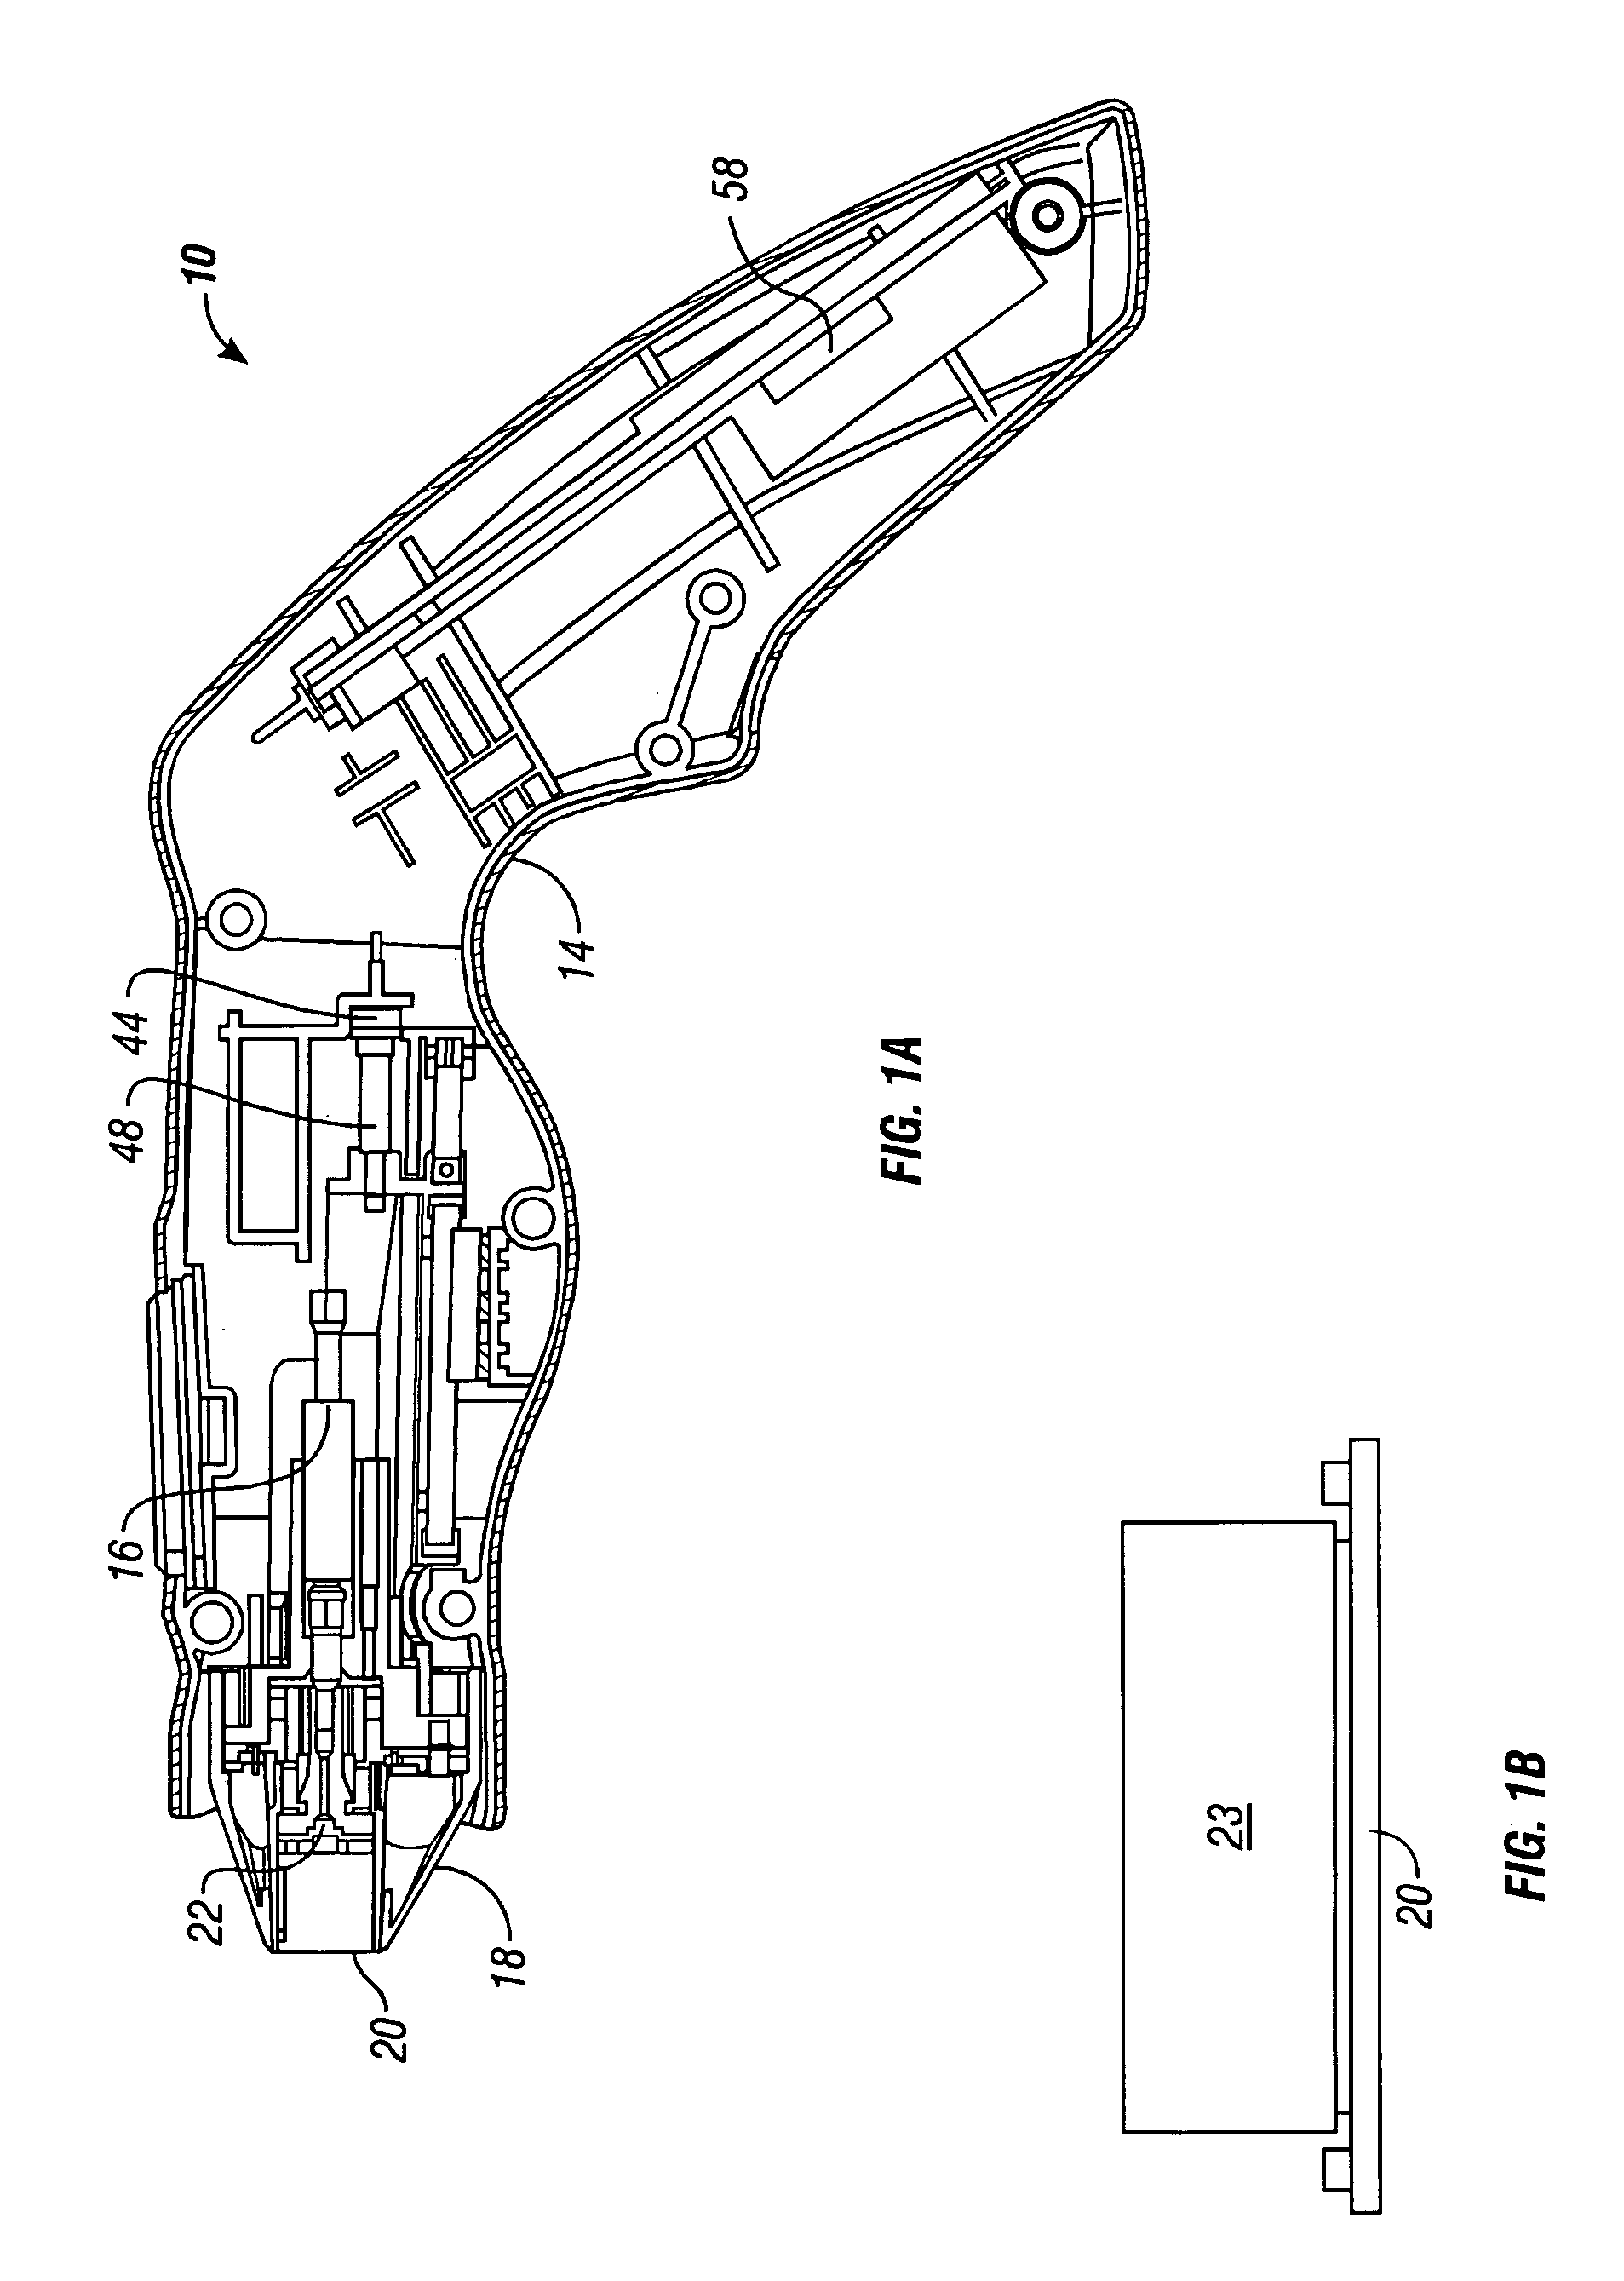 RF device with thermo-electric cooler